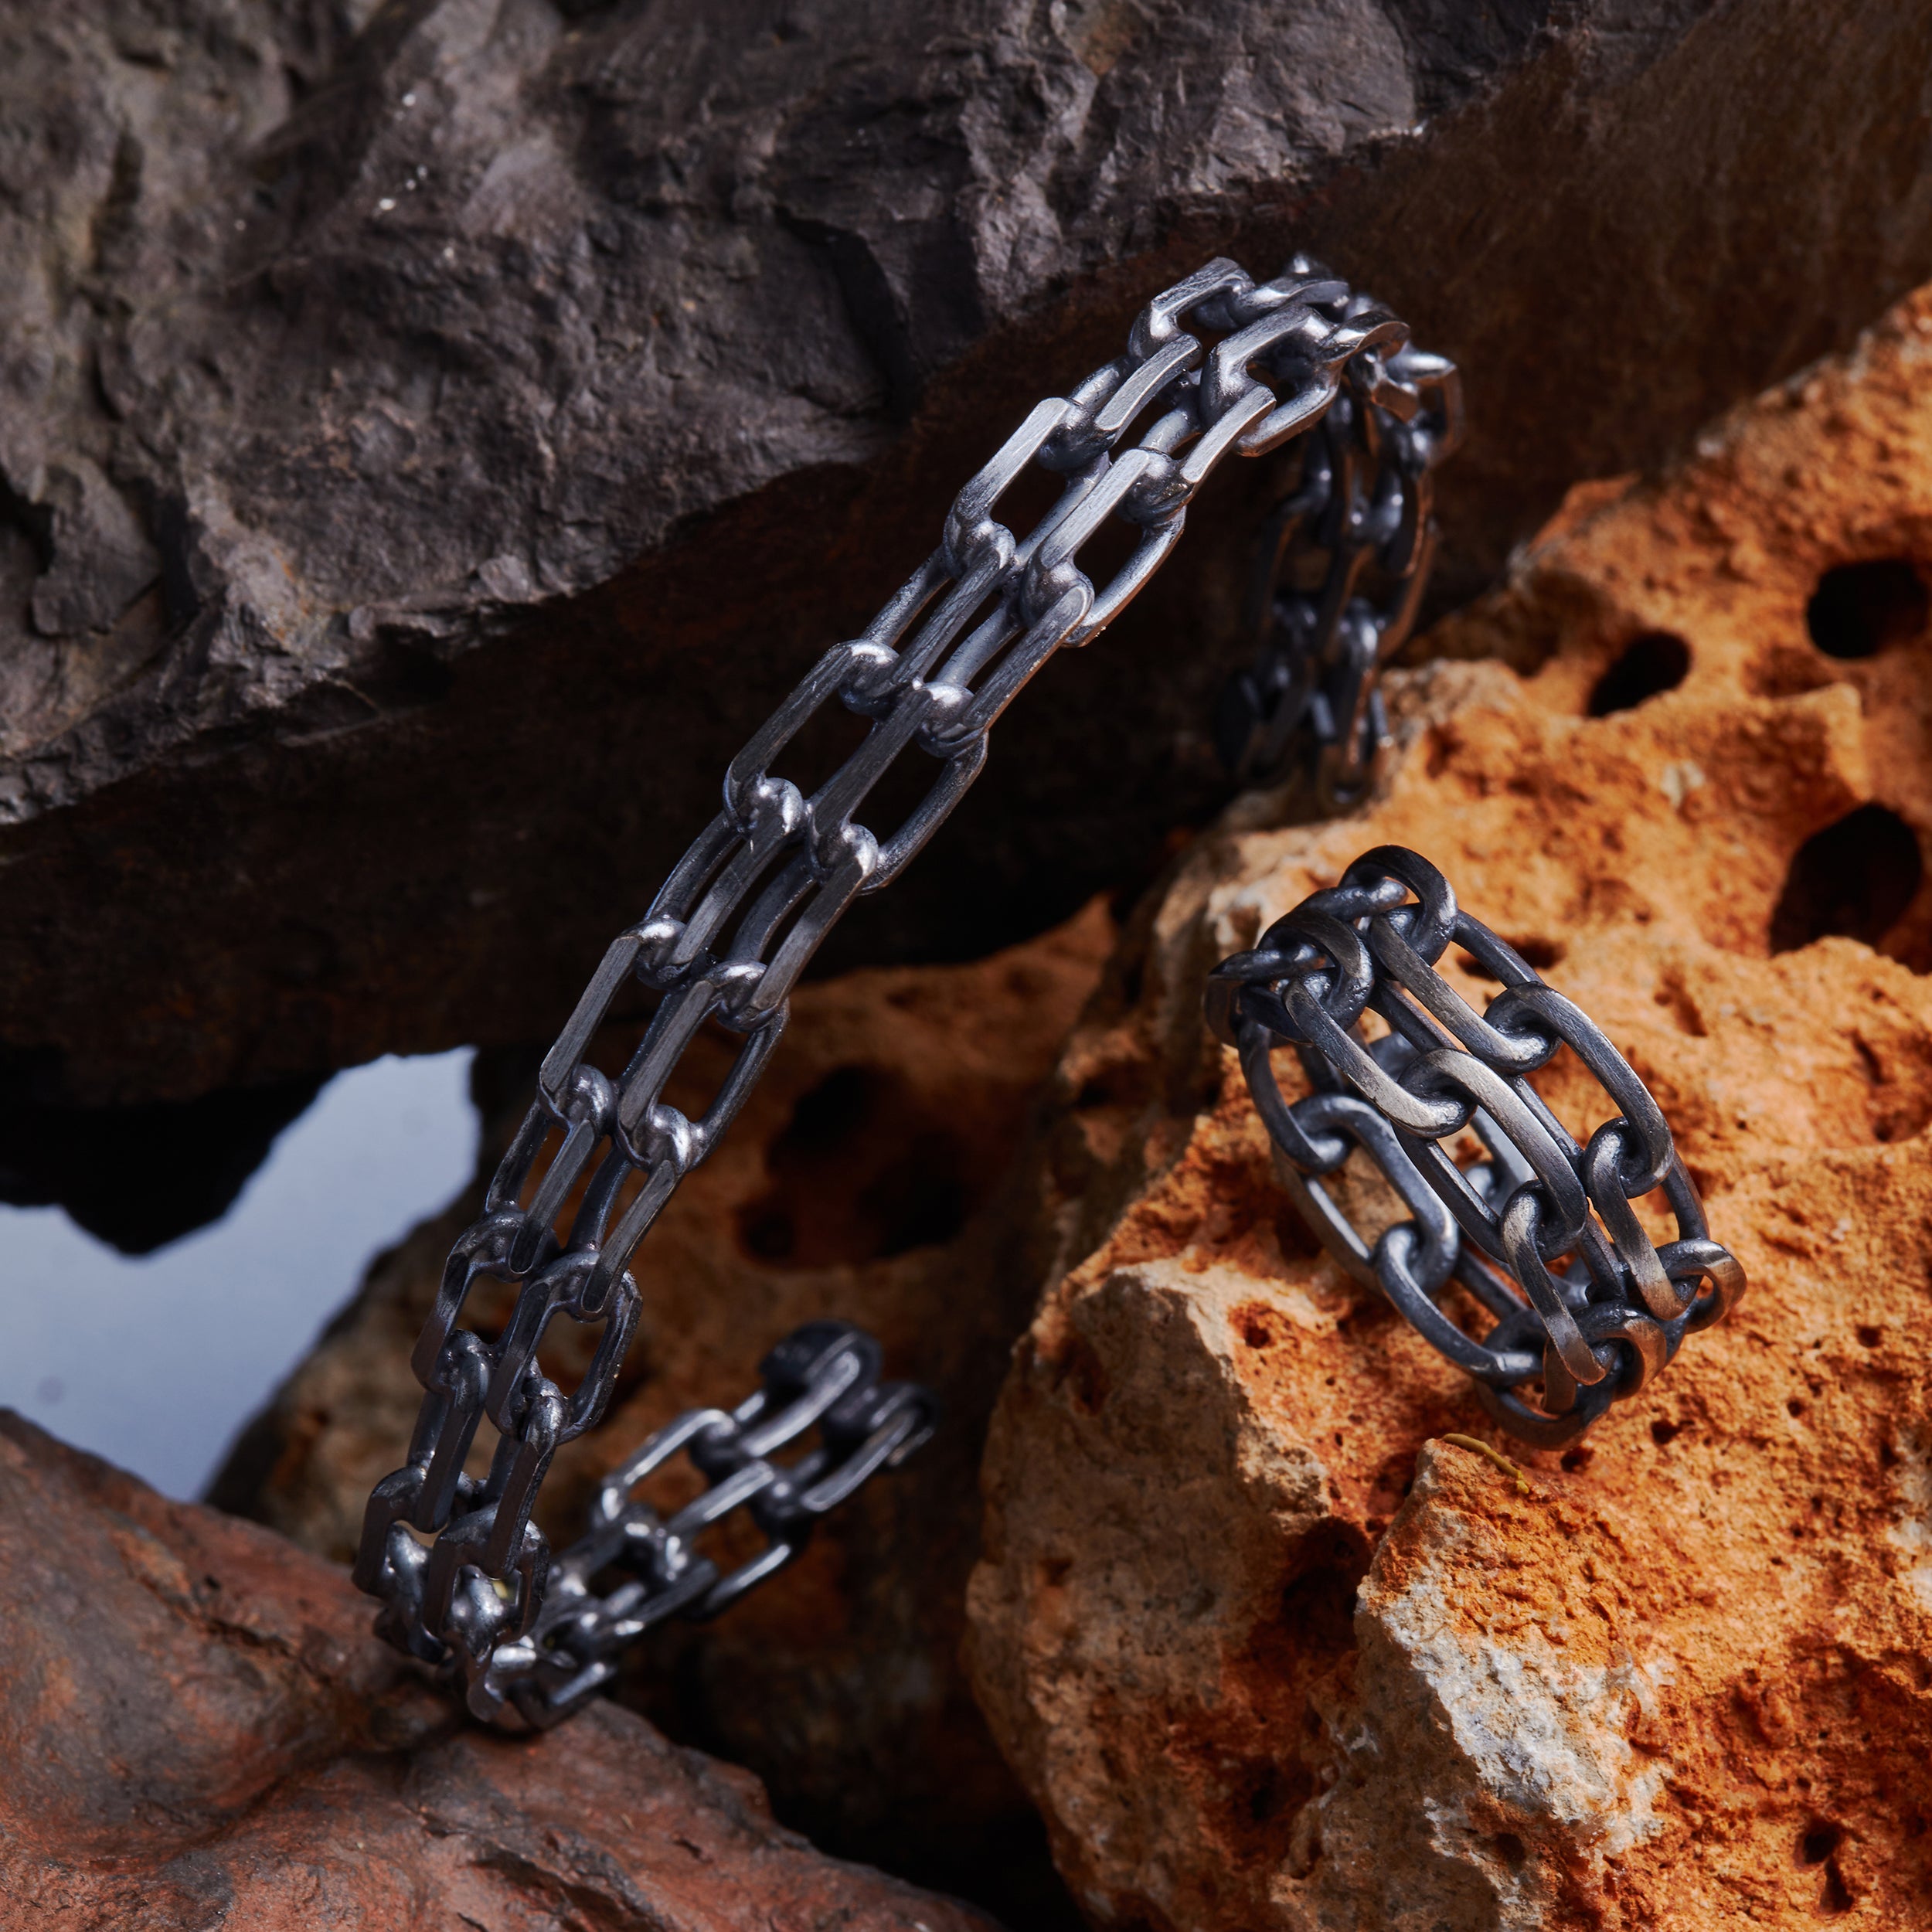 Double Forsa Chain Bangle in Oxide